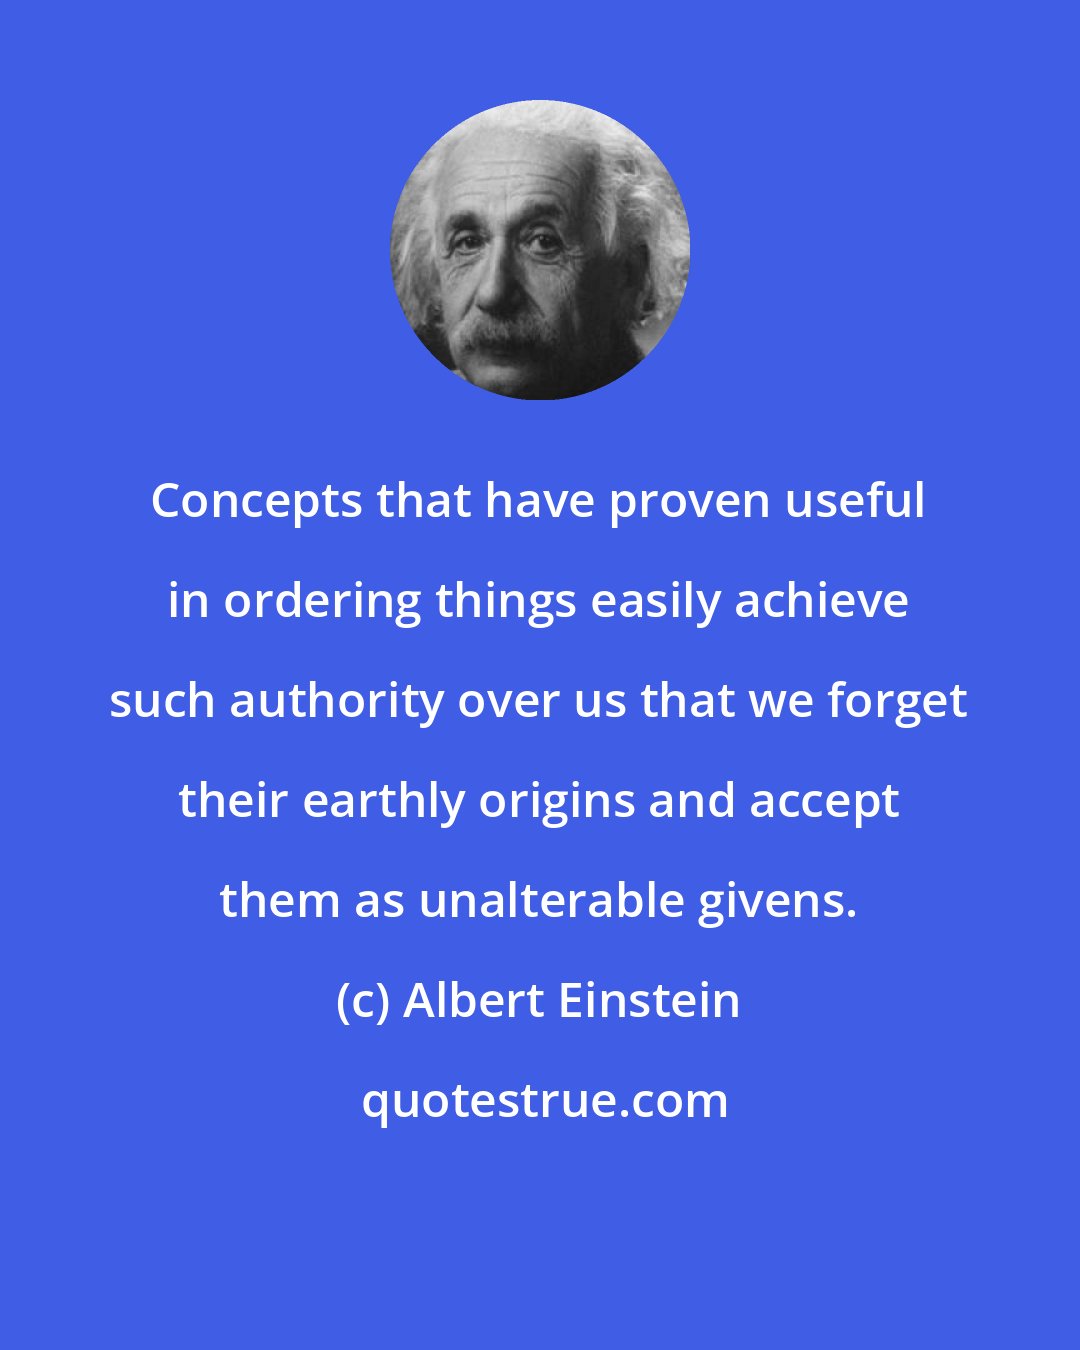 Albert Einstein: Concepts that have proven useful in ordering things easily achieve such authority over us that we forget their earthly origins and accept them as unalterable givens.